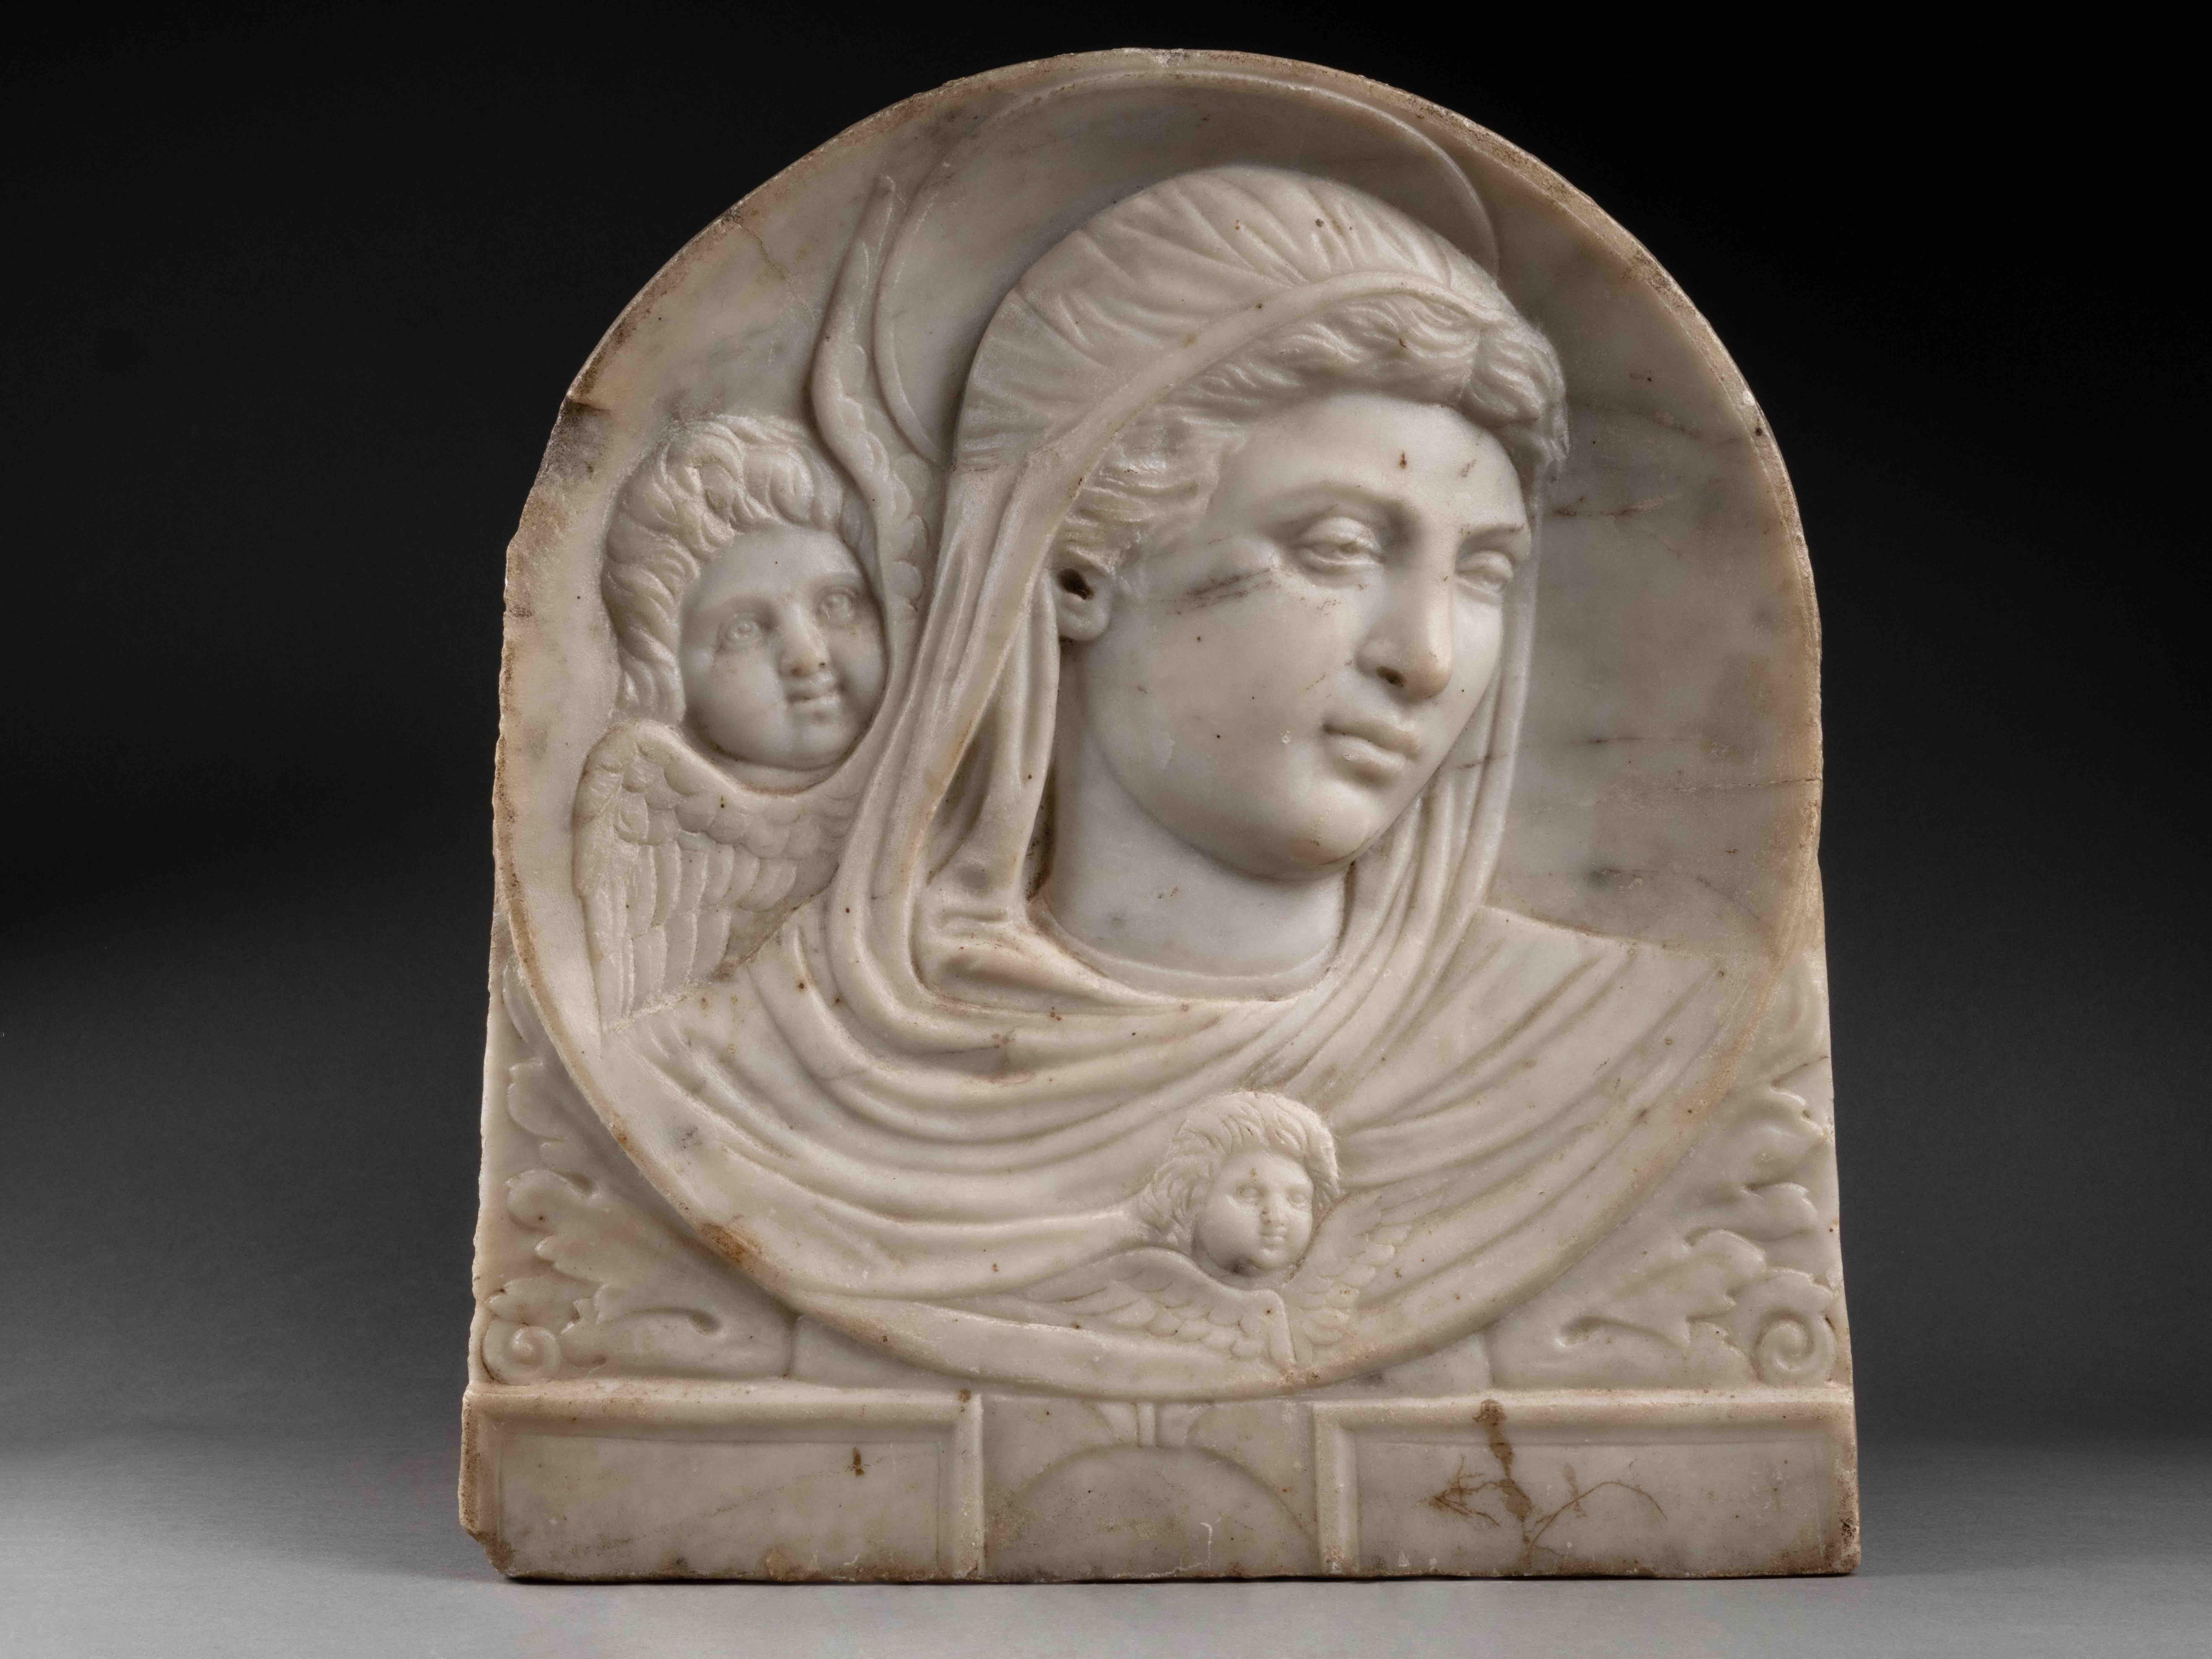 Renaissance Marble Relief 
Emilia Romagna, Faenza ? 1470-80
H 30,2 x L 33 x P 3,5 cm

The carved marble relief depicts the Virgin accompanied by a winged cherub standing behind her. The relief is set within a concave circle, where the Virgin's face